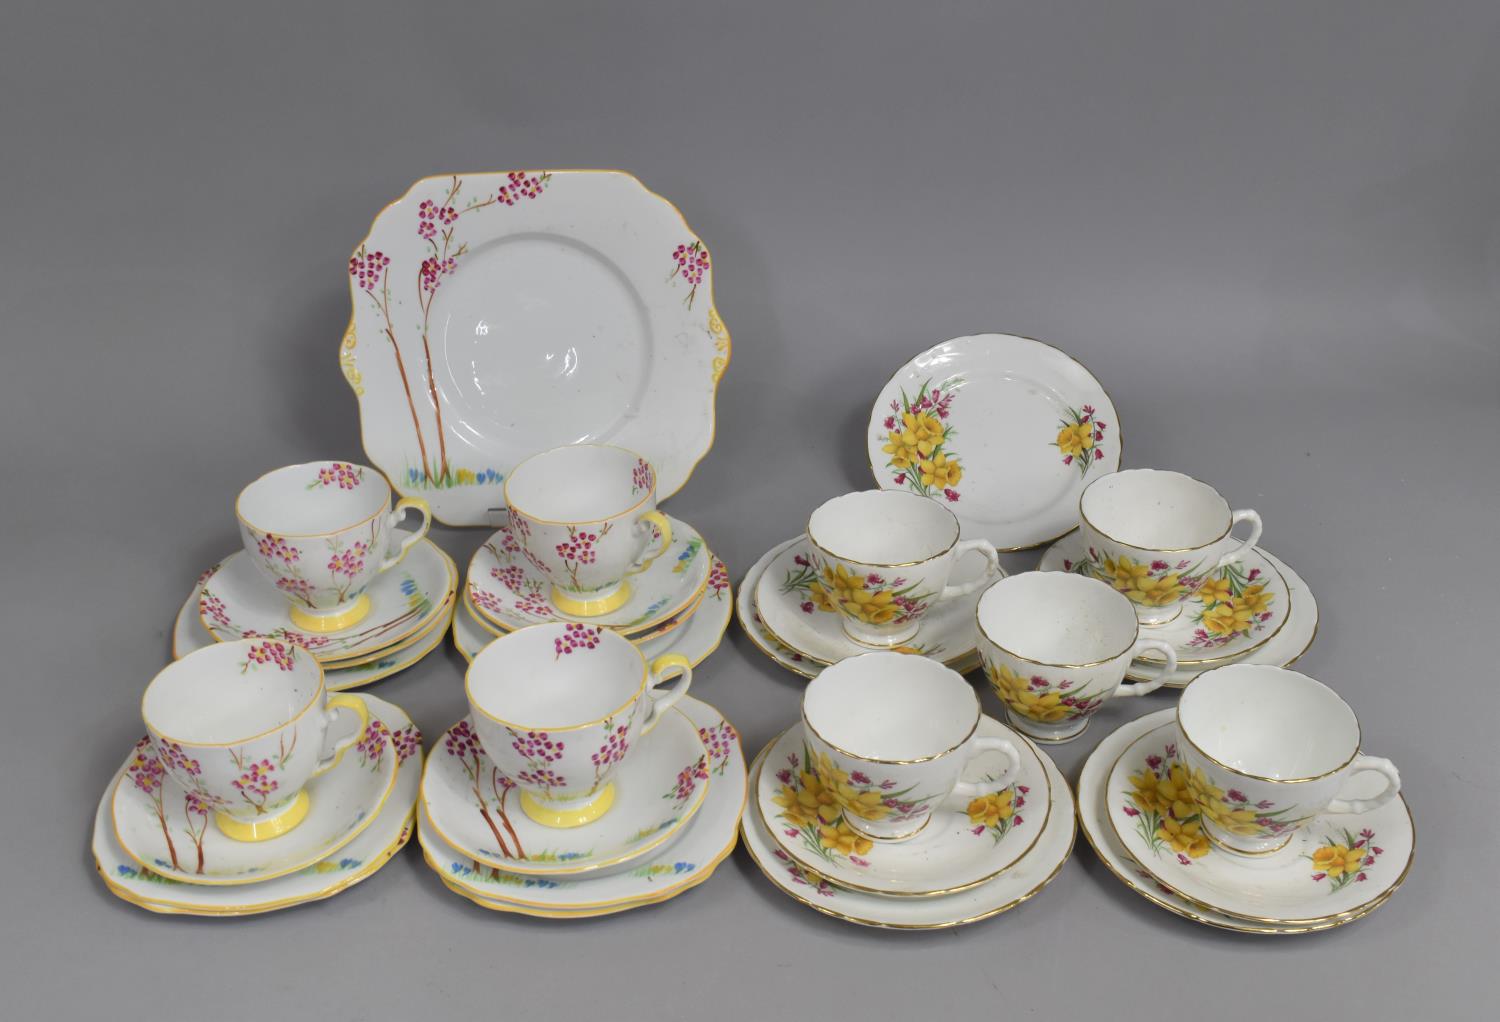 An Art Deco Gladstone China Part Tea Set comprising Four Cups, Six Saucers, Side plates and a Cake